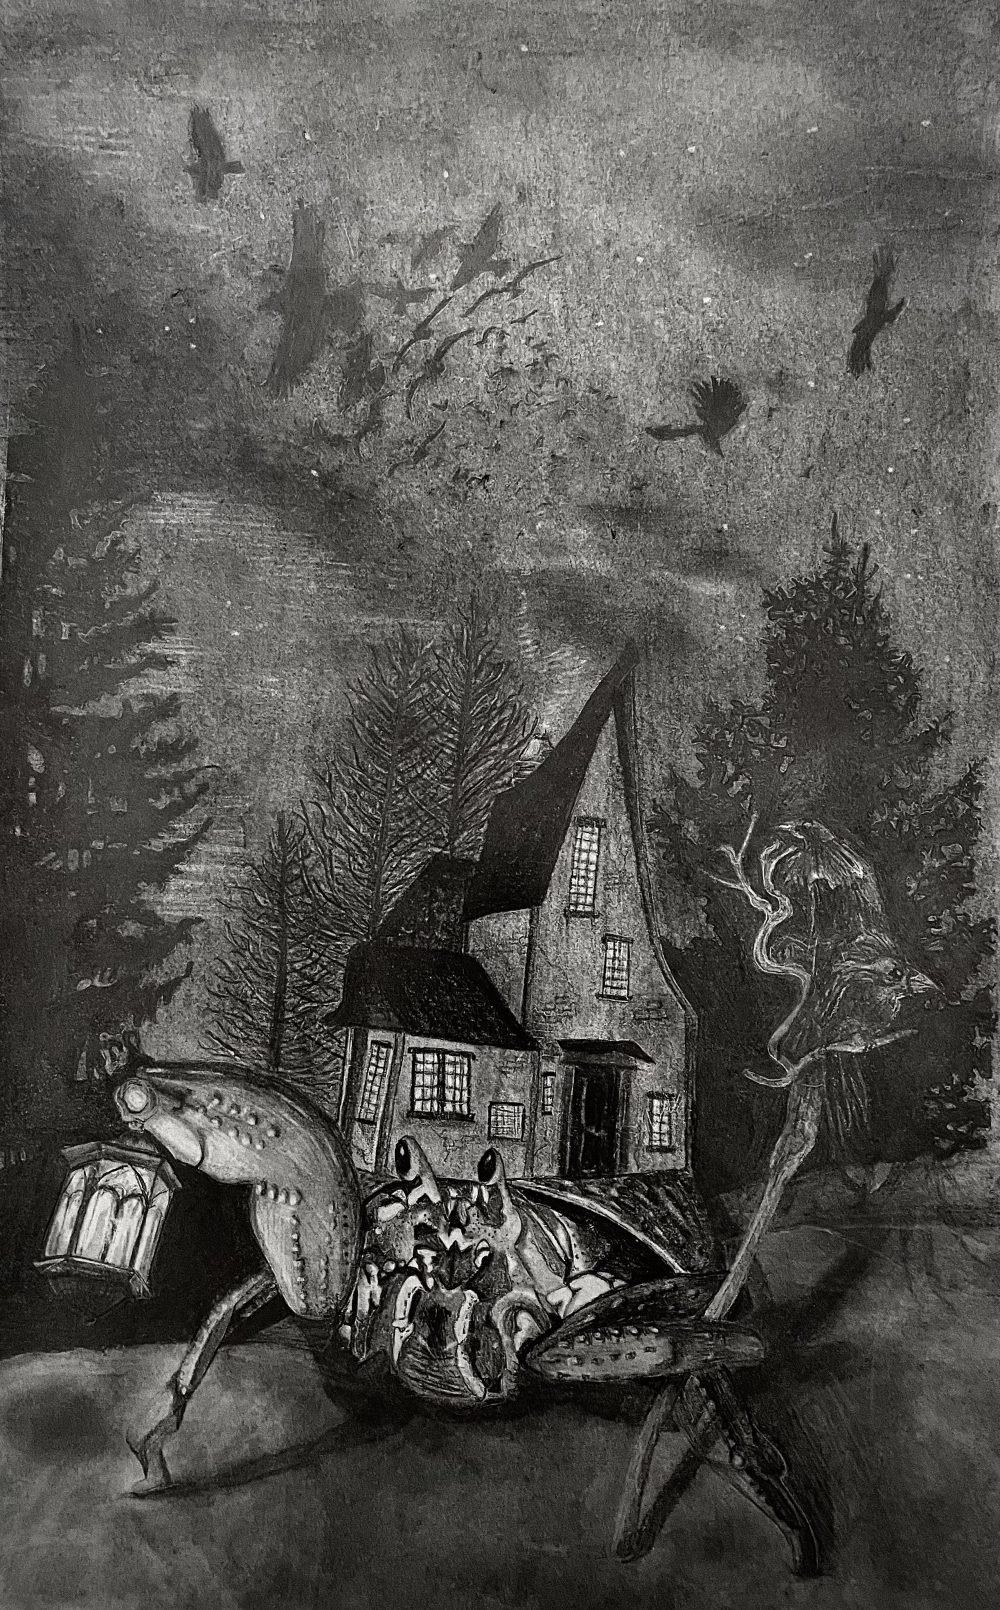 This is an image of a hermit crab with a house for a shell, in a forest at night, holding a lantern in one claw and a staff with two ravens roosting on the top in the other.